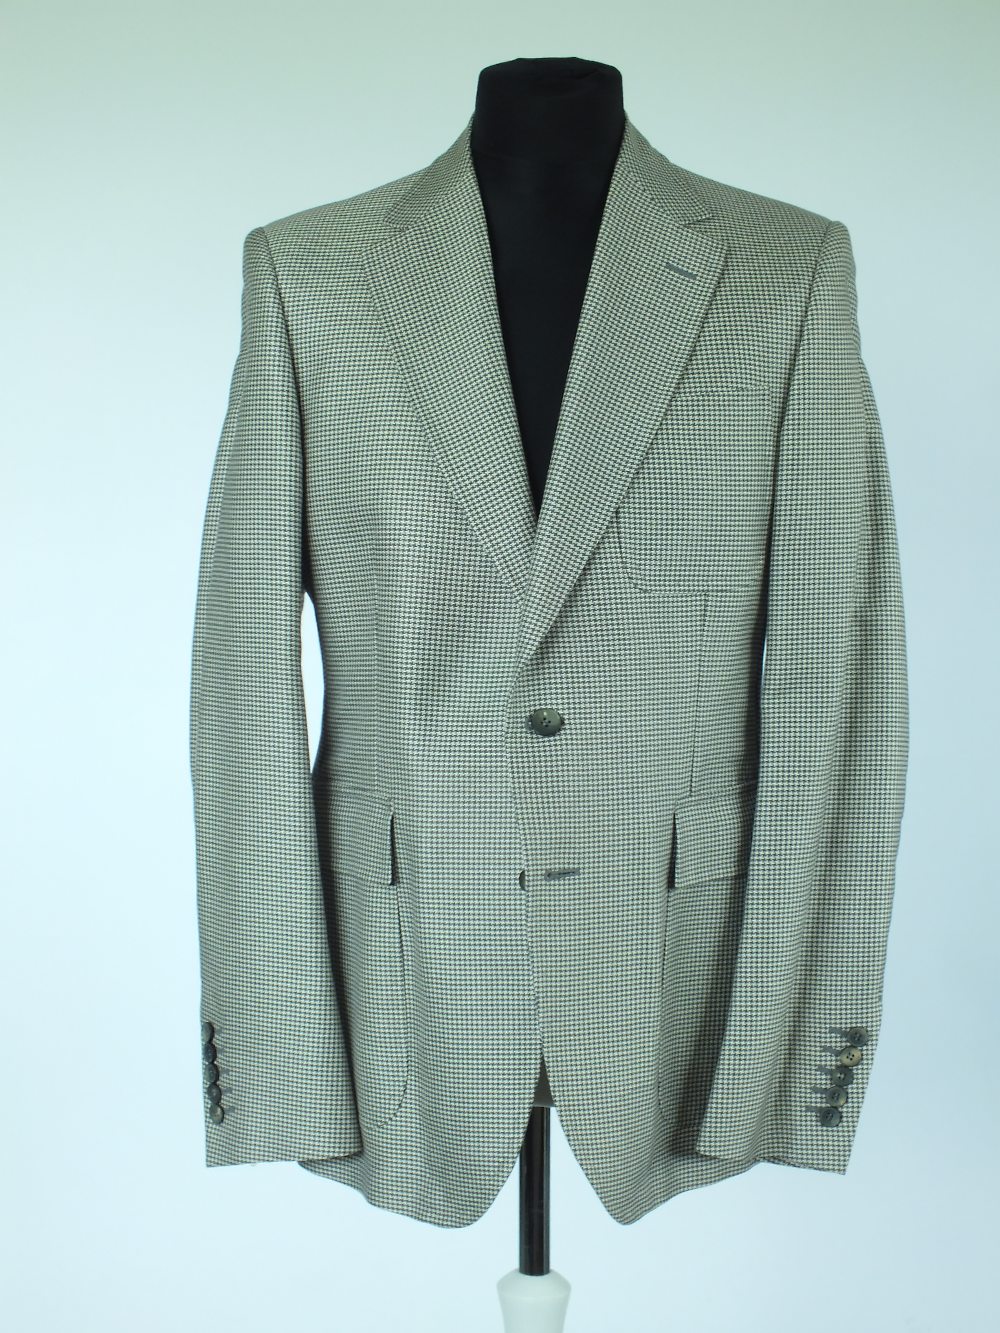 A Gucci sports jacket, mid grey dogs tooth check, patch breast pocket, single vent, half lined in